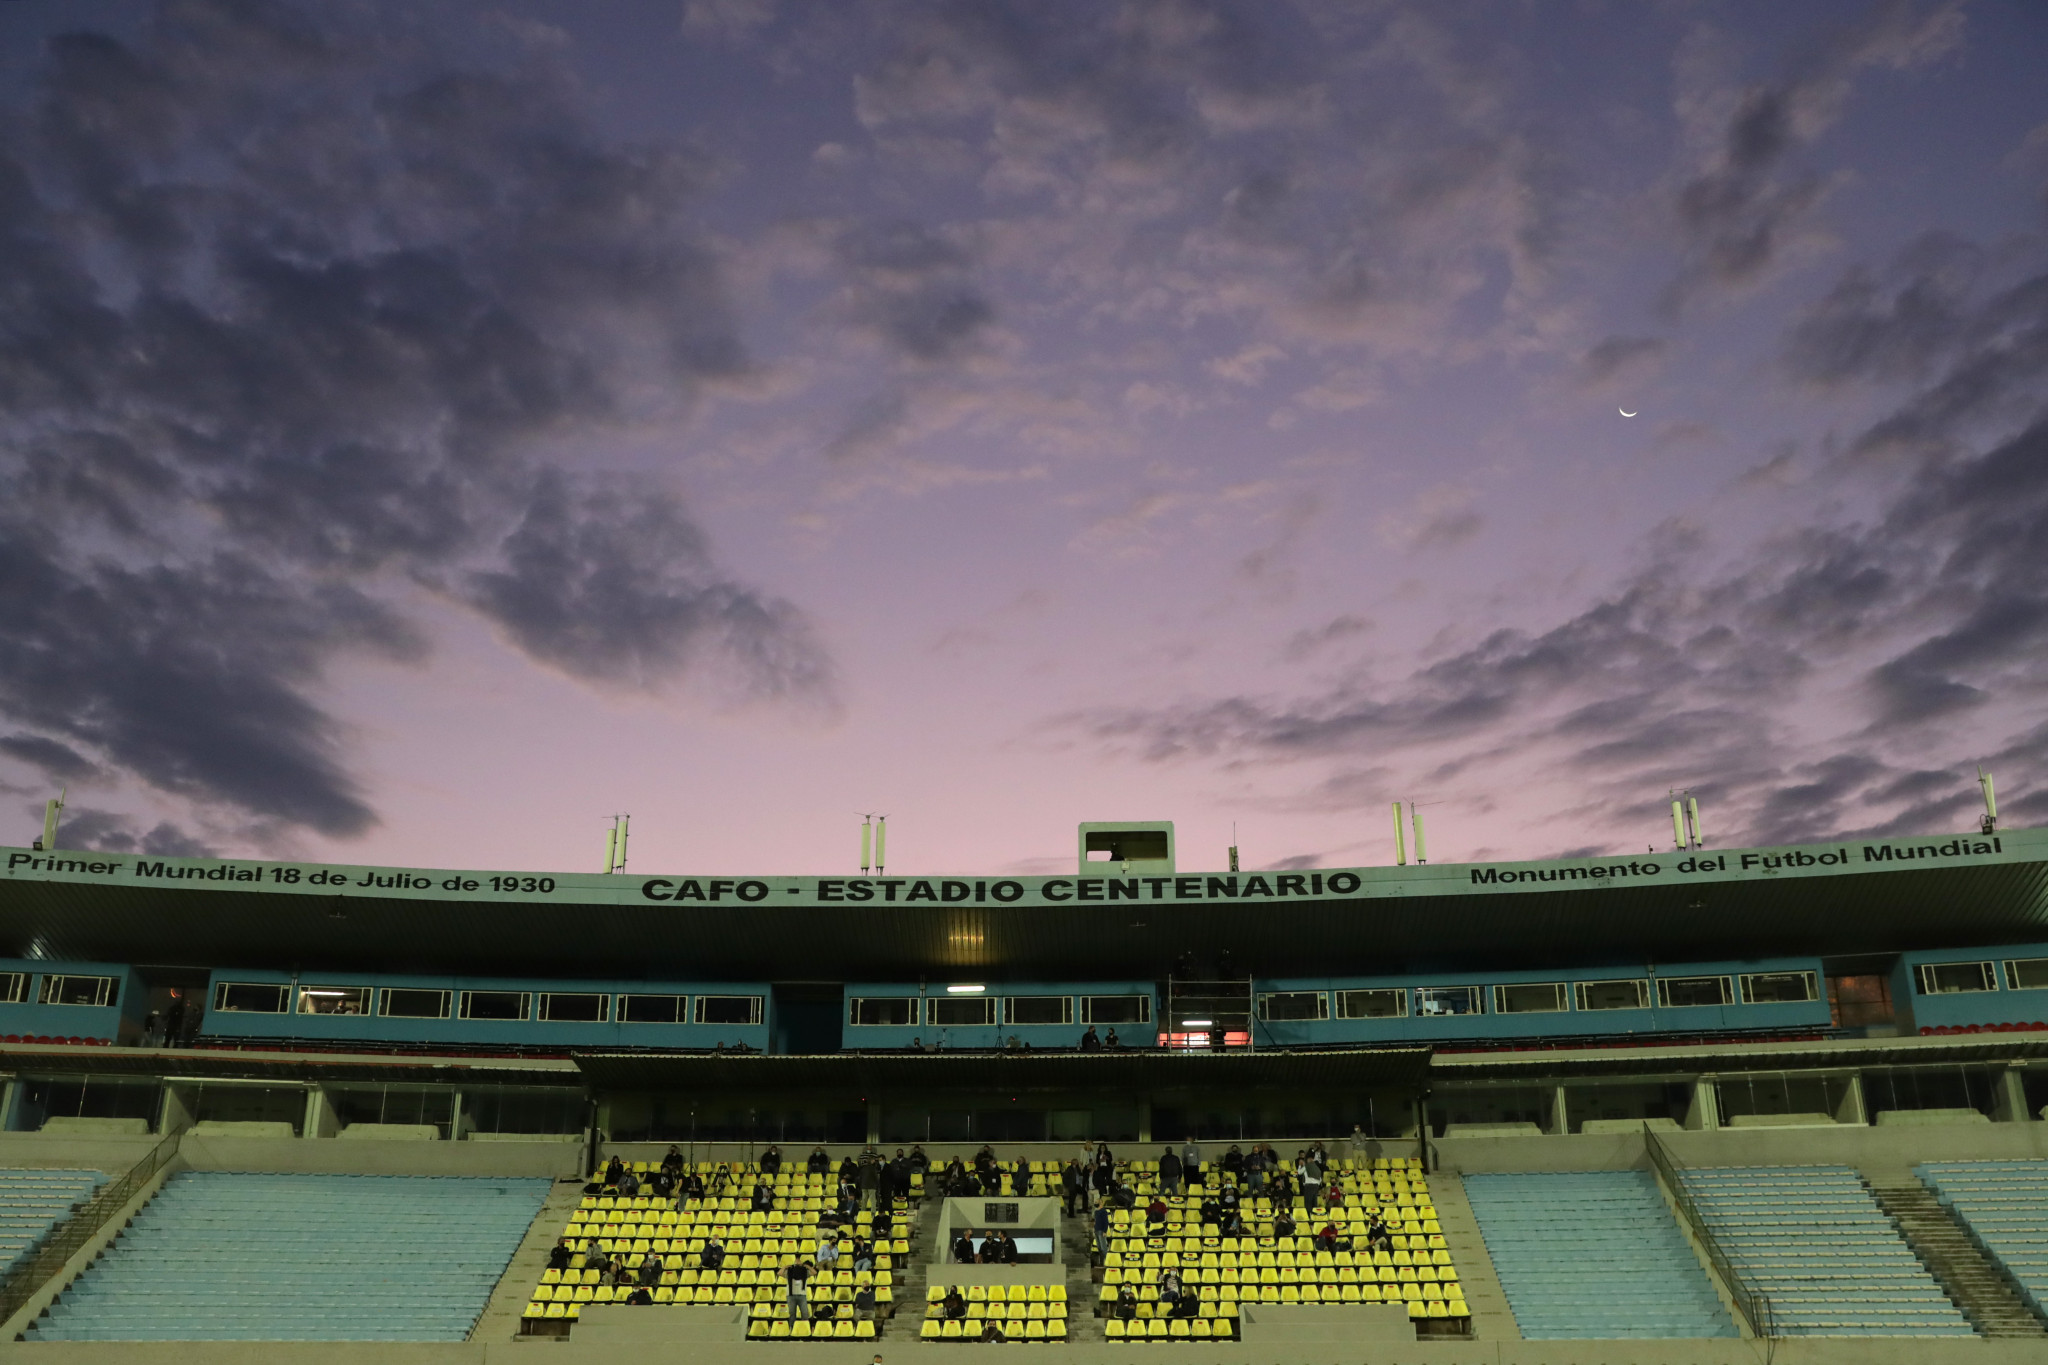 Every match of the tournament was played at the Estadio Centenario in Montevideo ©Getty Images